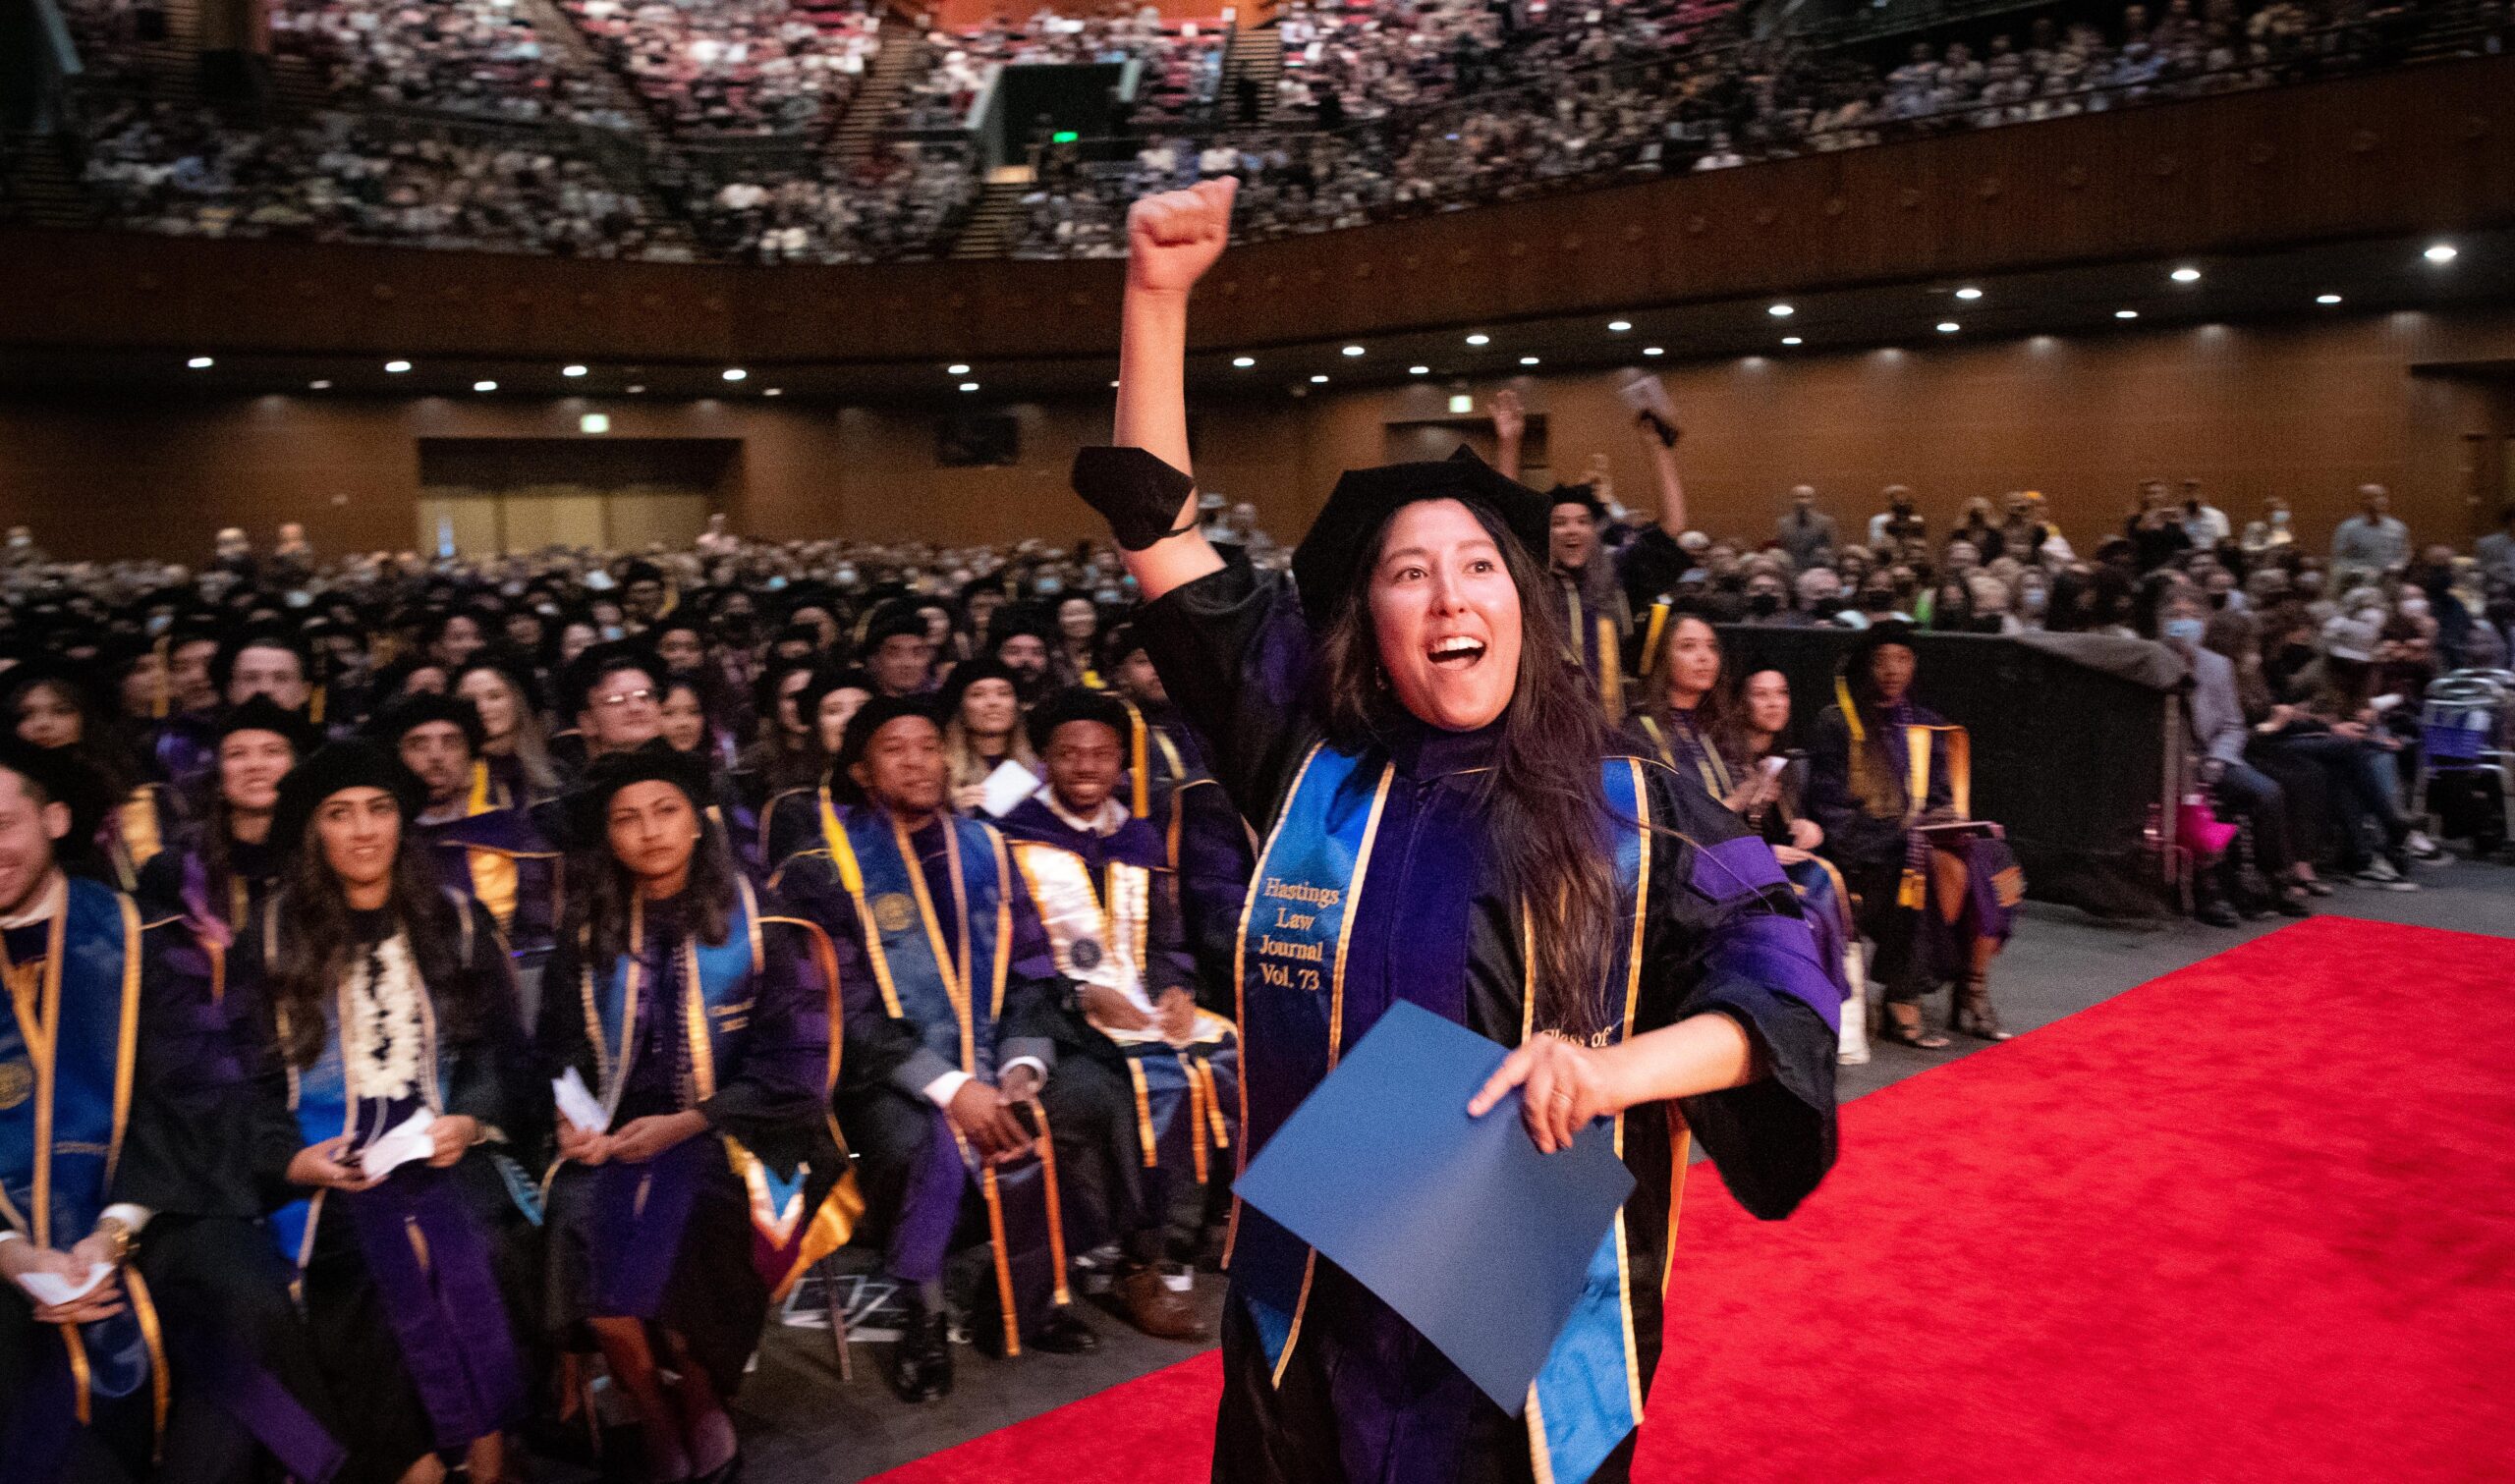 A graduate celebrating at the commencement ceremony